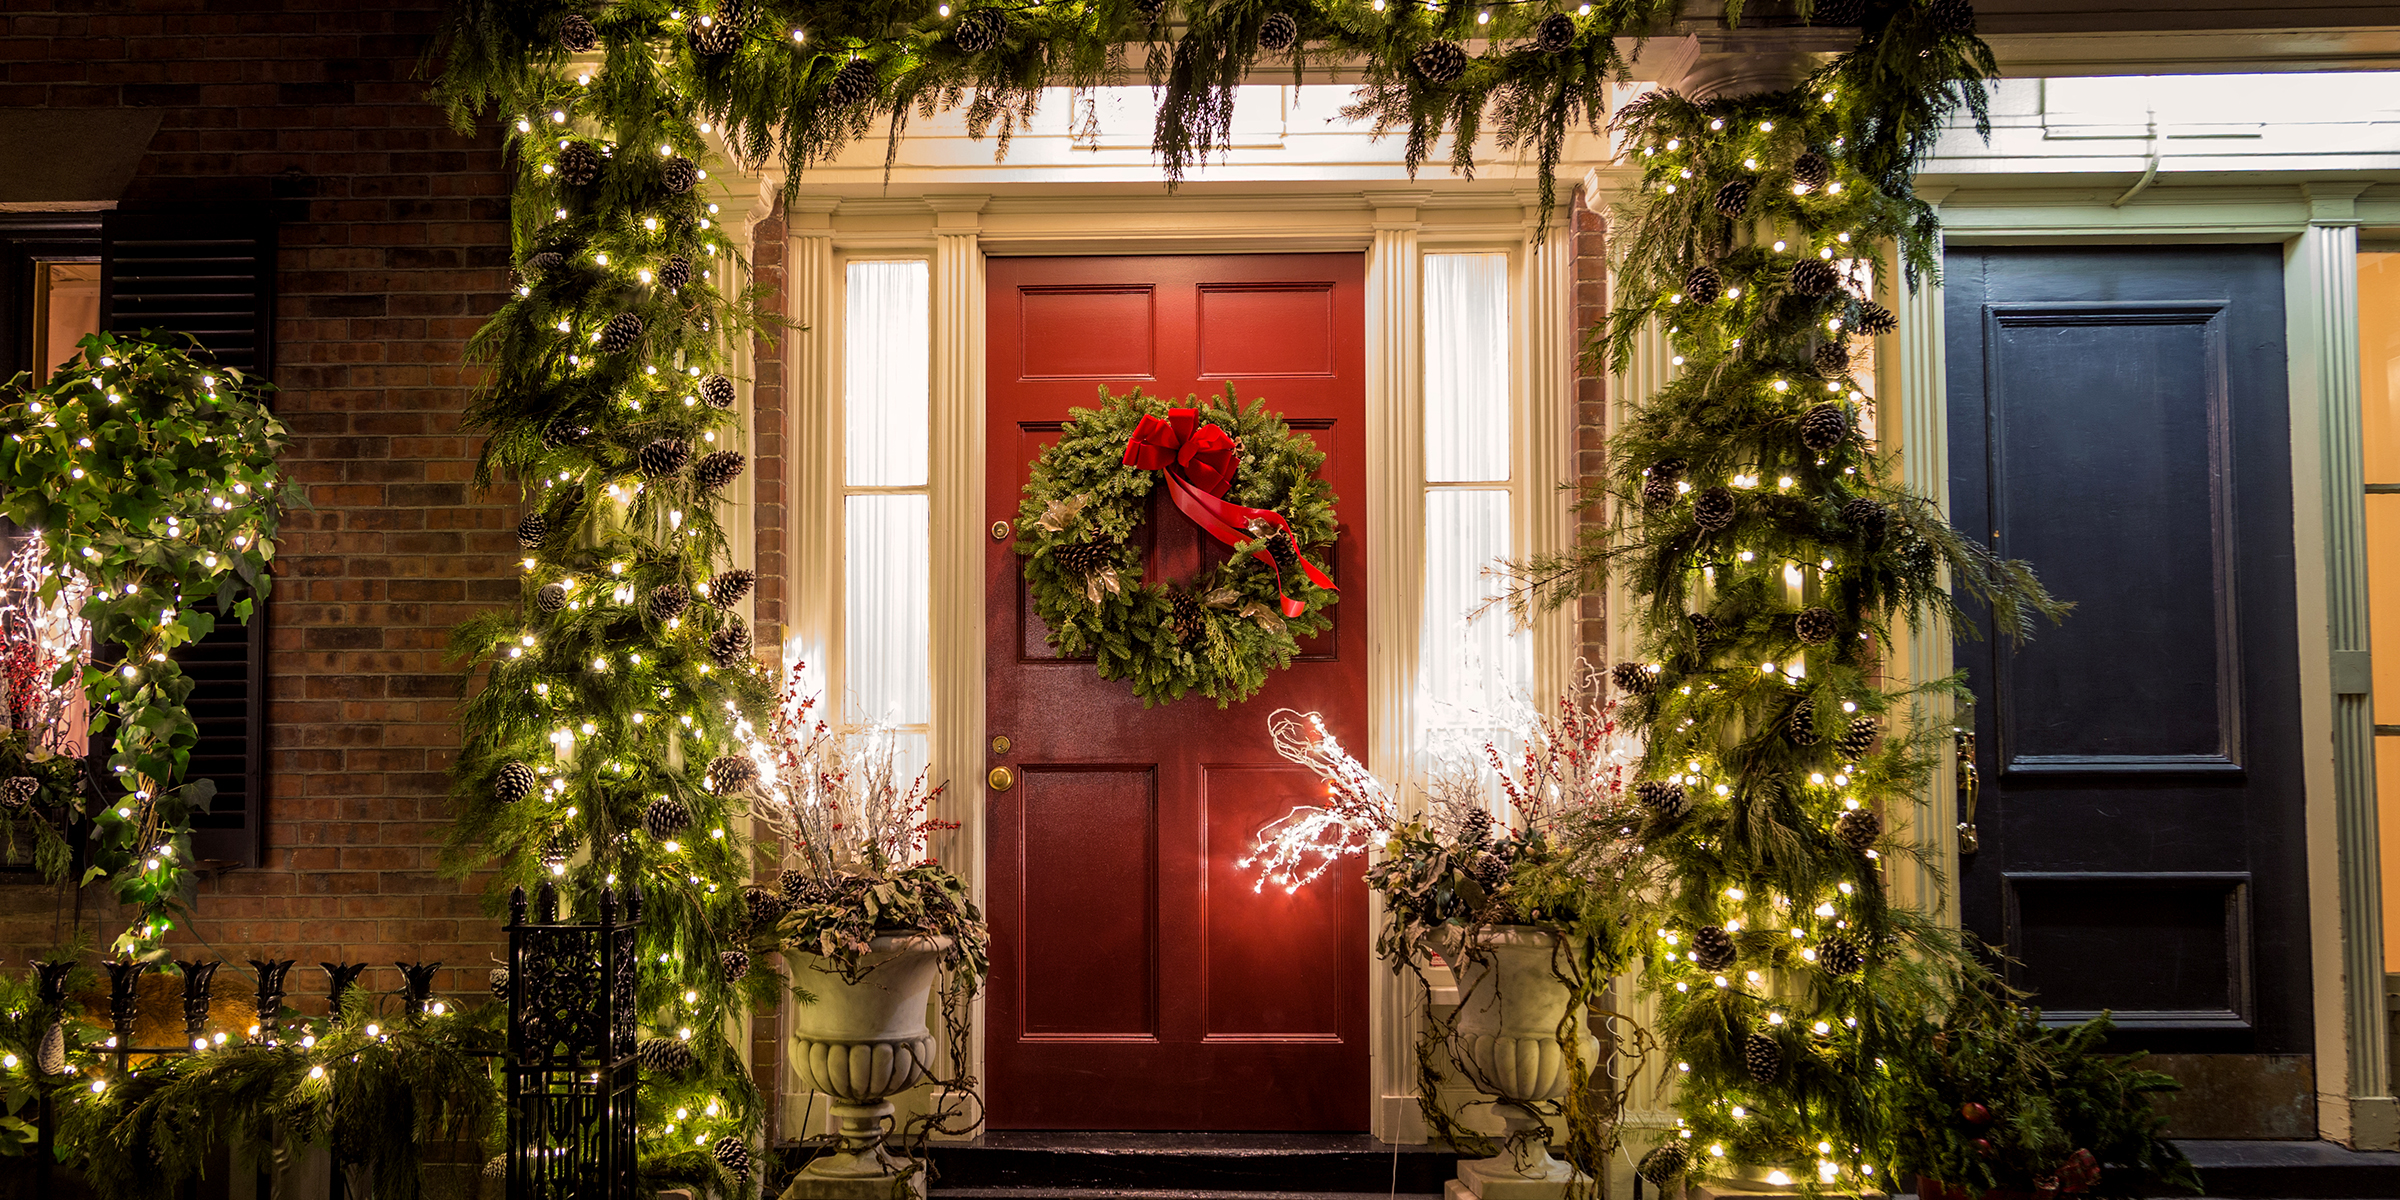 A house decorated with Christmas decor | Source: Shutterstock